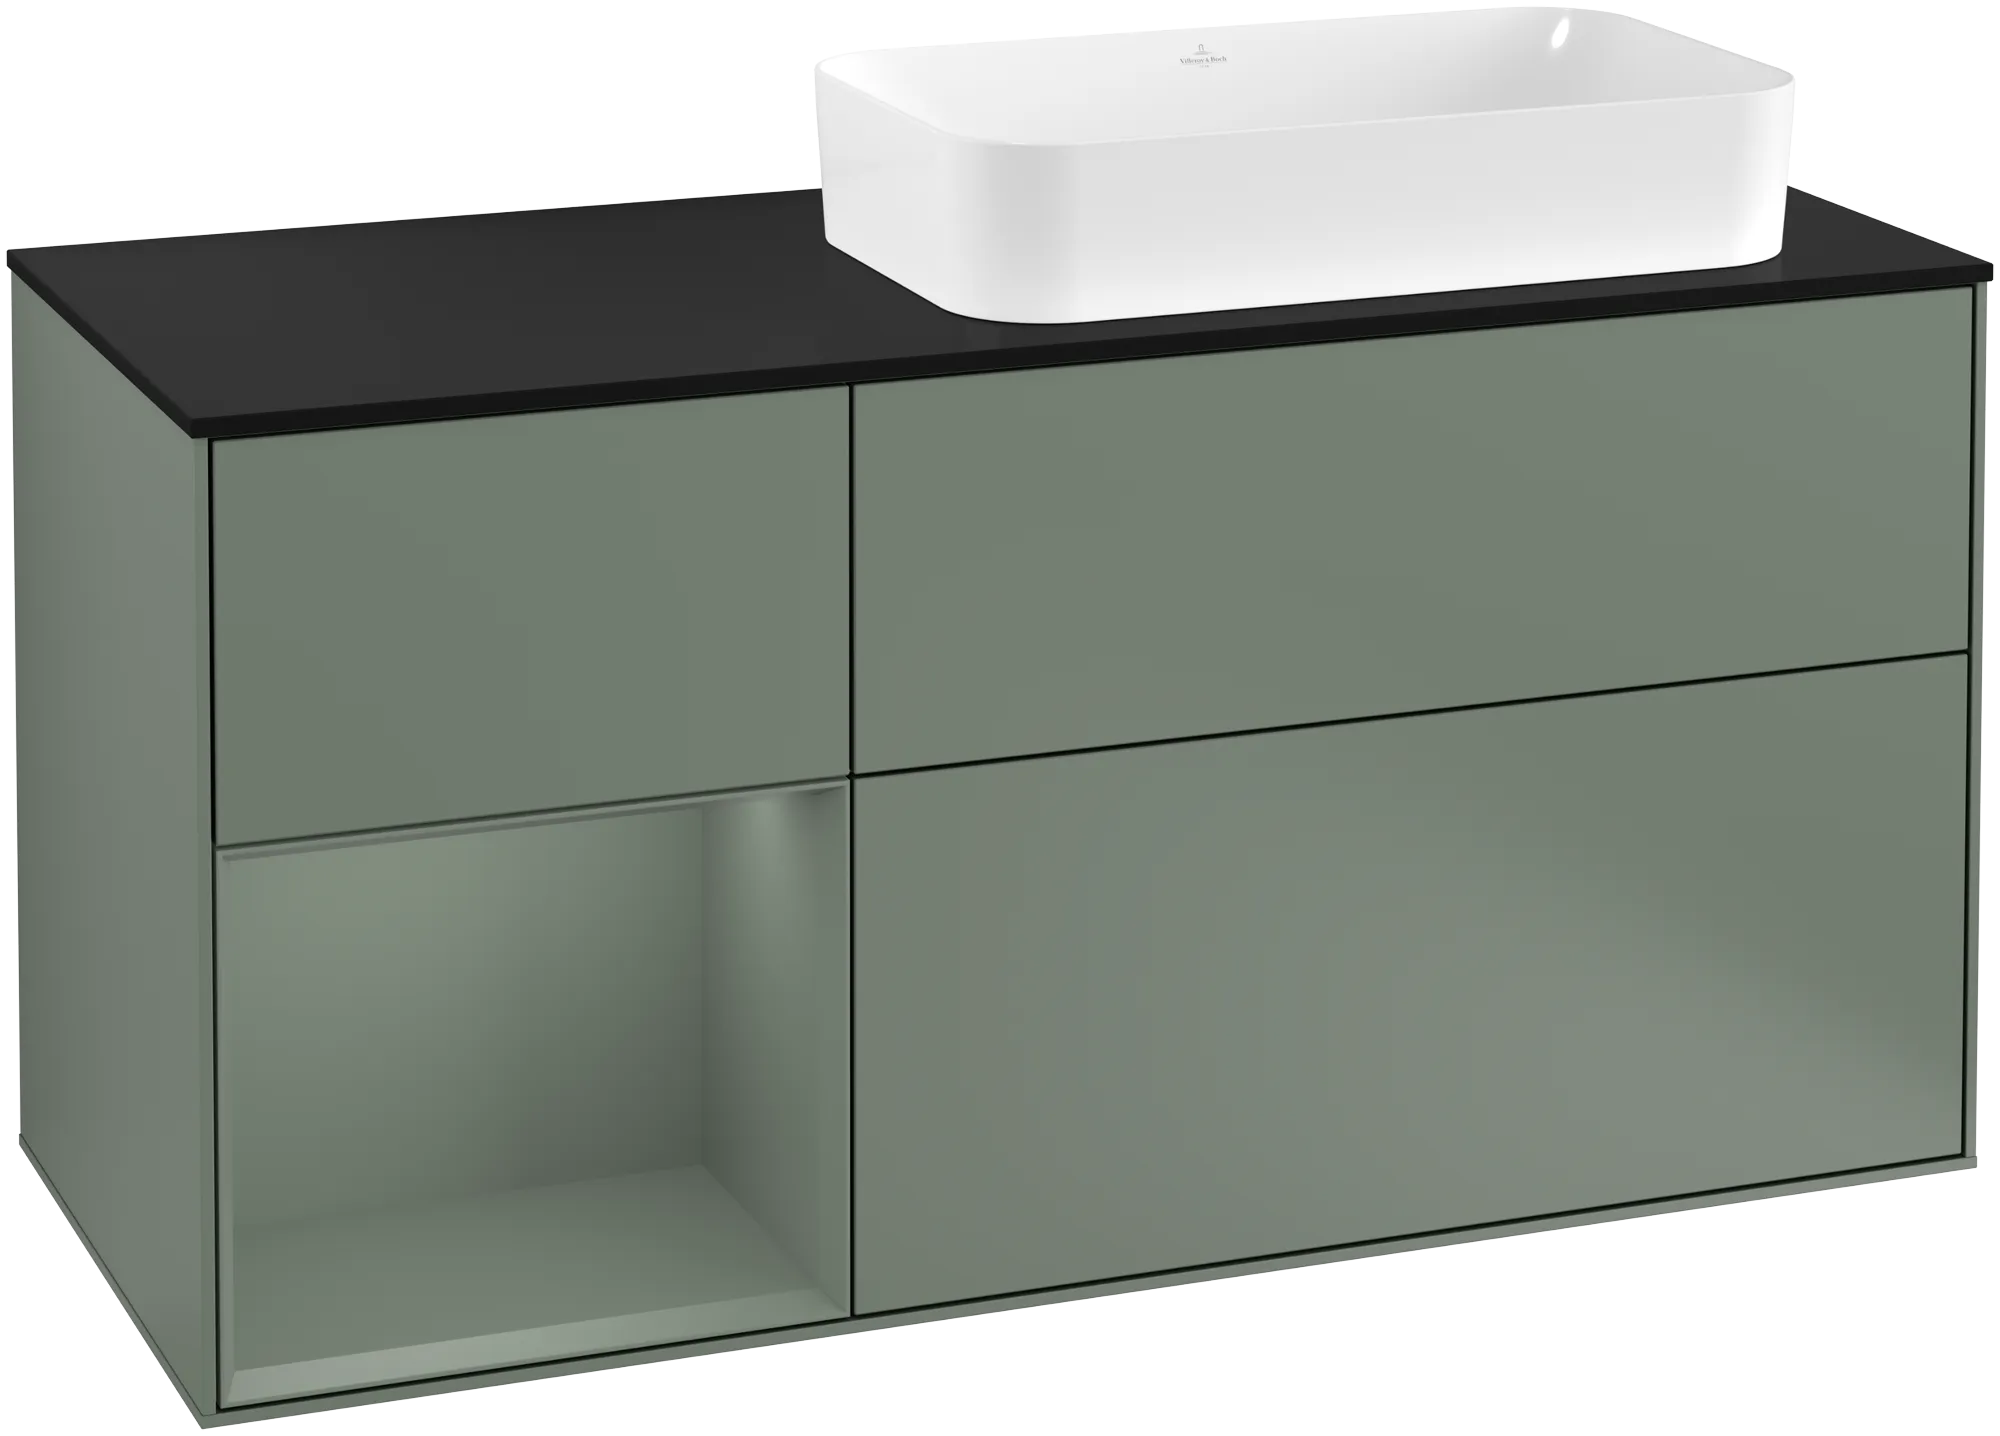 Picture of VILLEROY BOCH Finion Vanity unit, with lighting, 3 pull-out compartments, 1200 x 603 x 501 mm, Olive Matt Lacquer / Olive Matt Lacquer / Glass Black Matt #G272GMGM